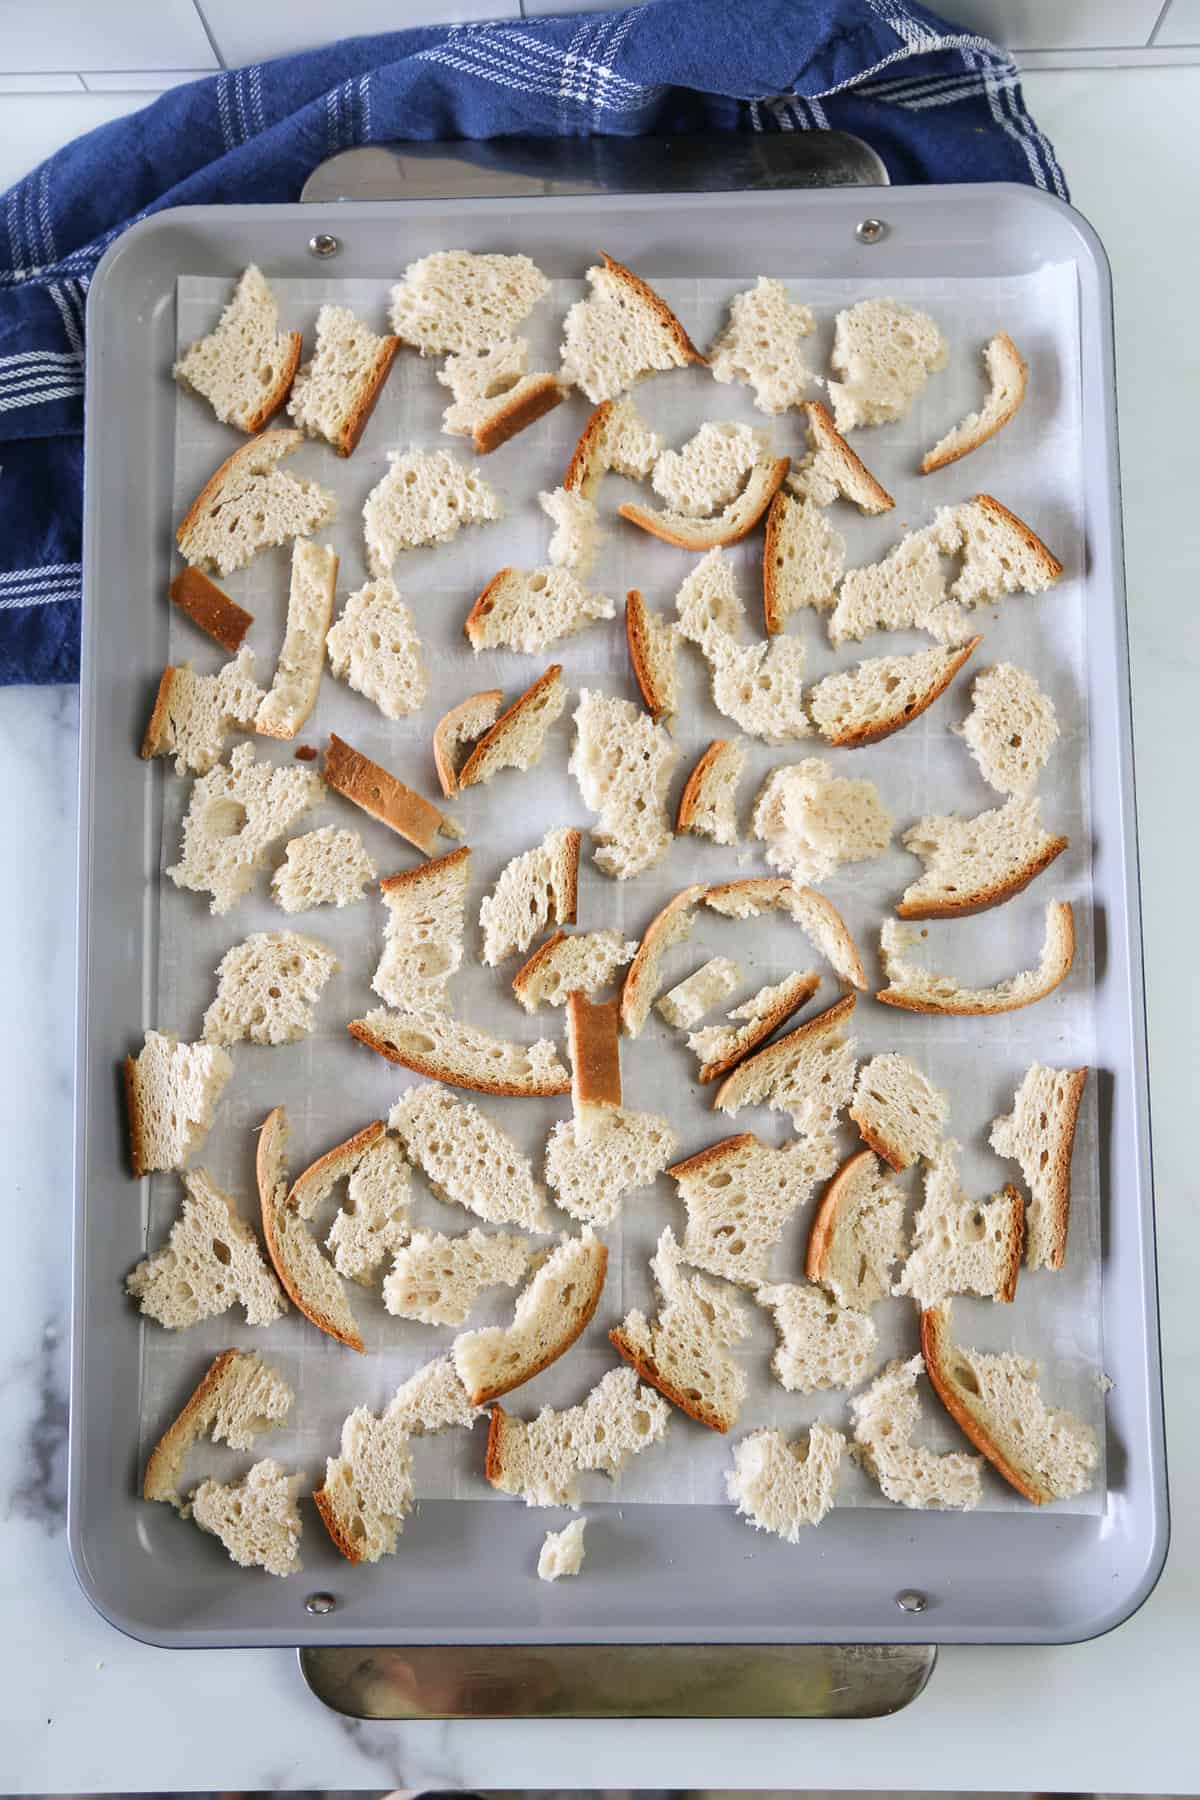 Torn up pieces of bread on a parchment lined baking sheet that have been baked.